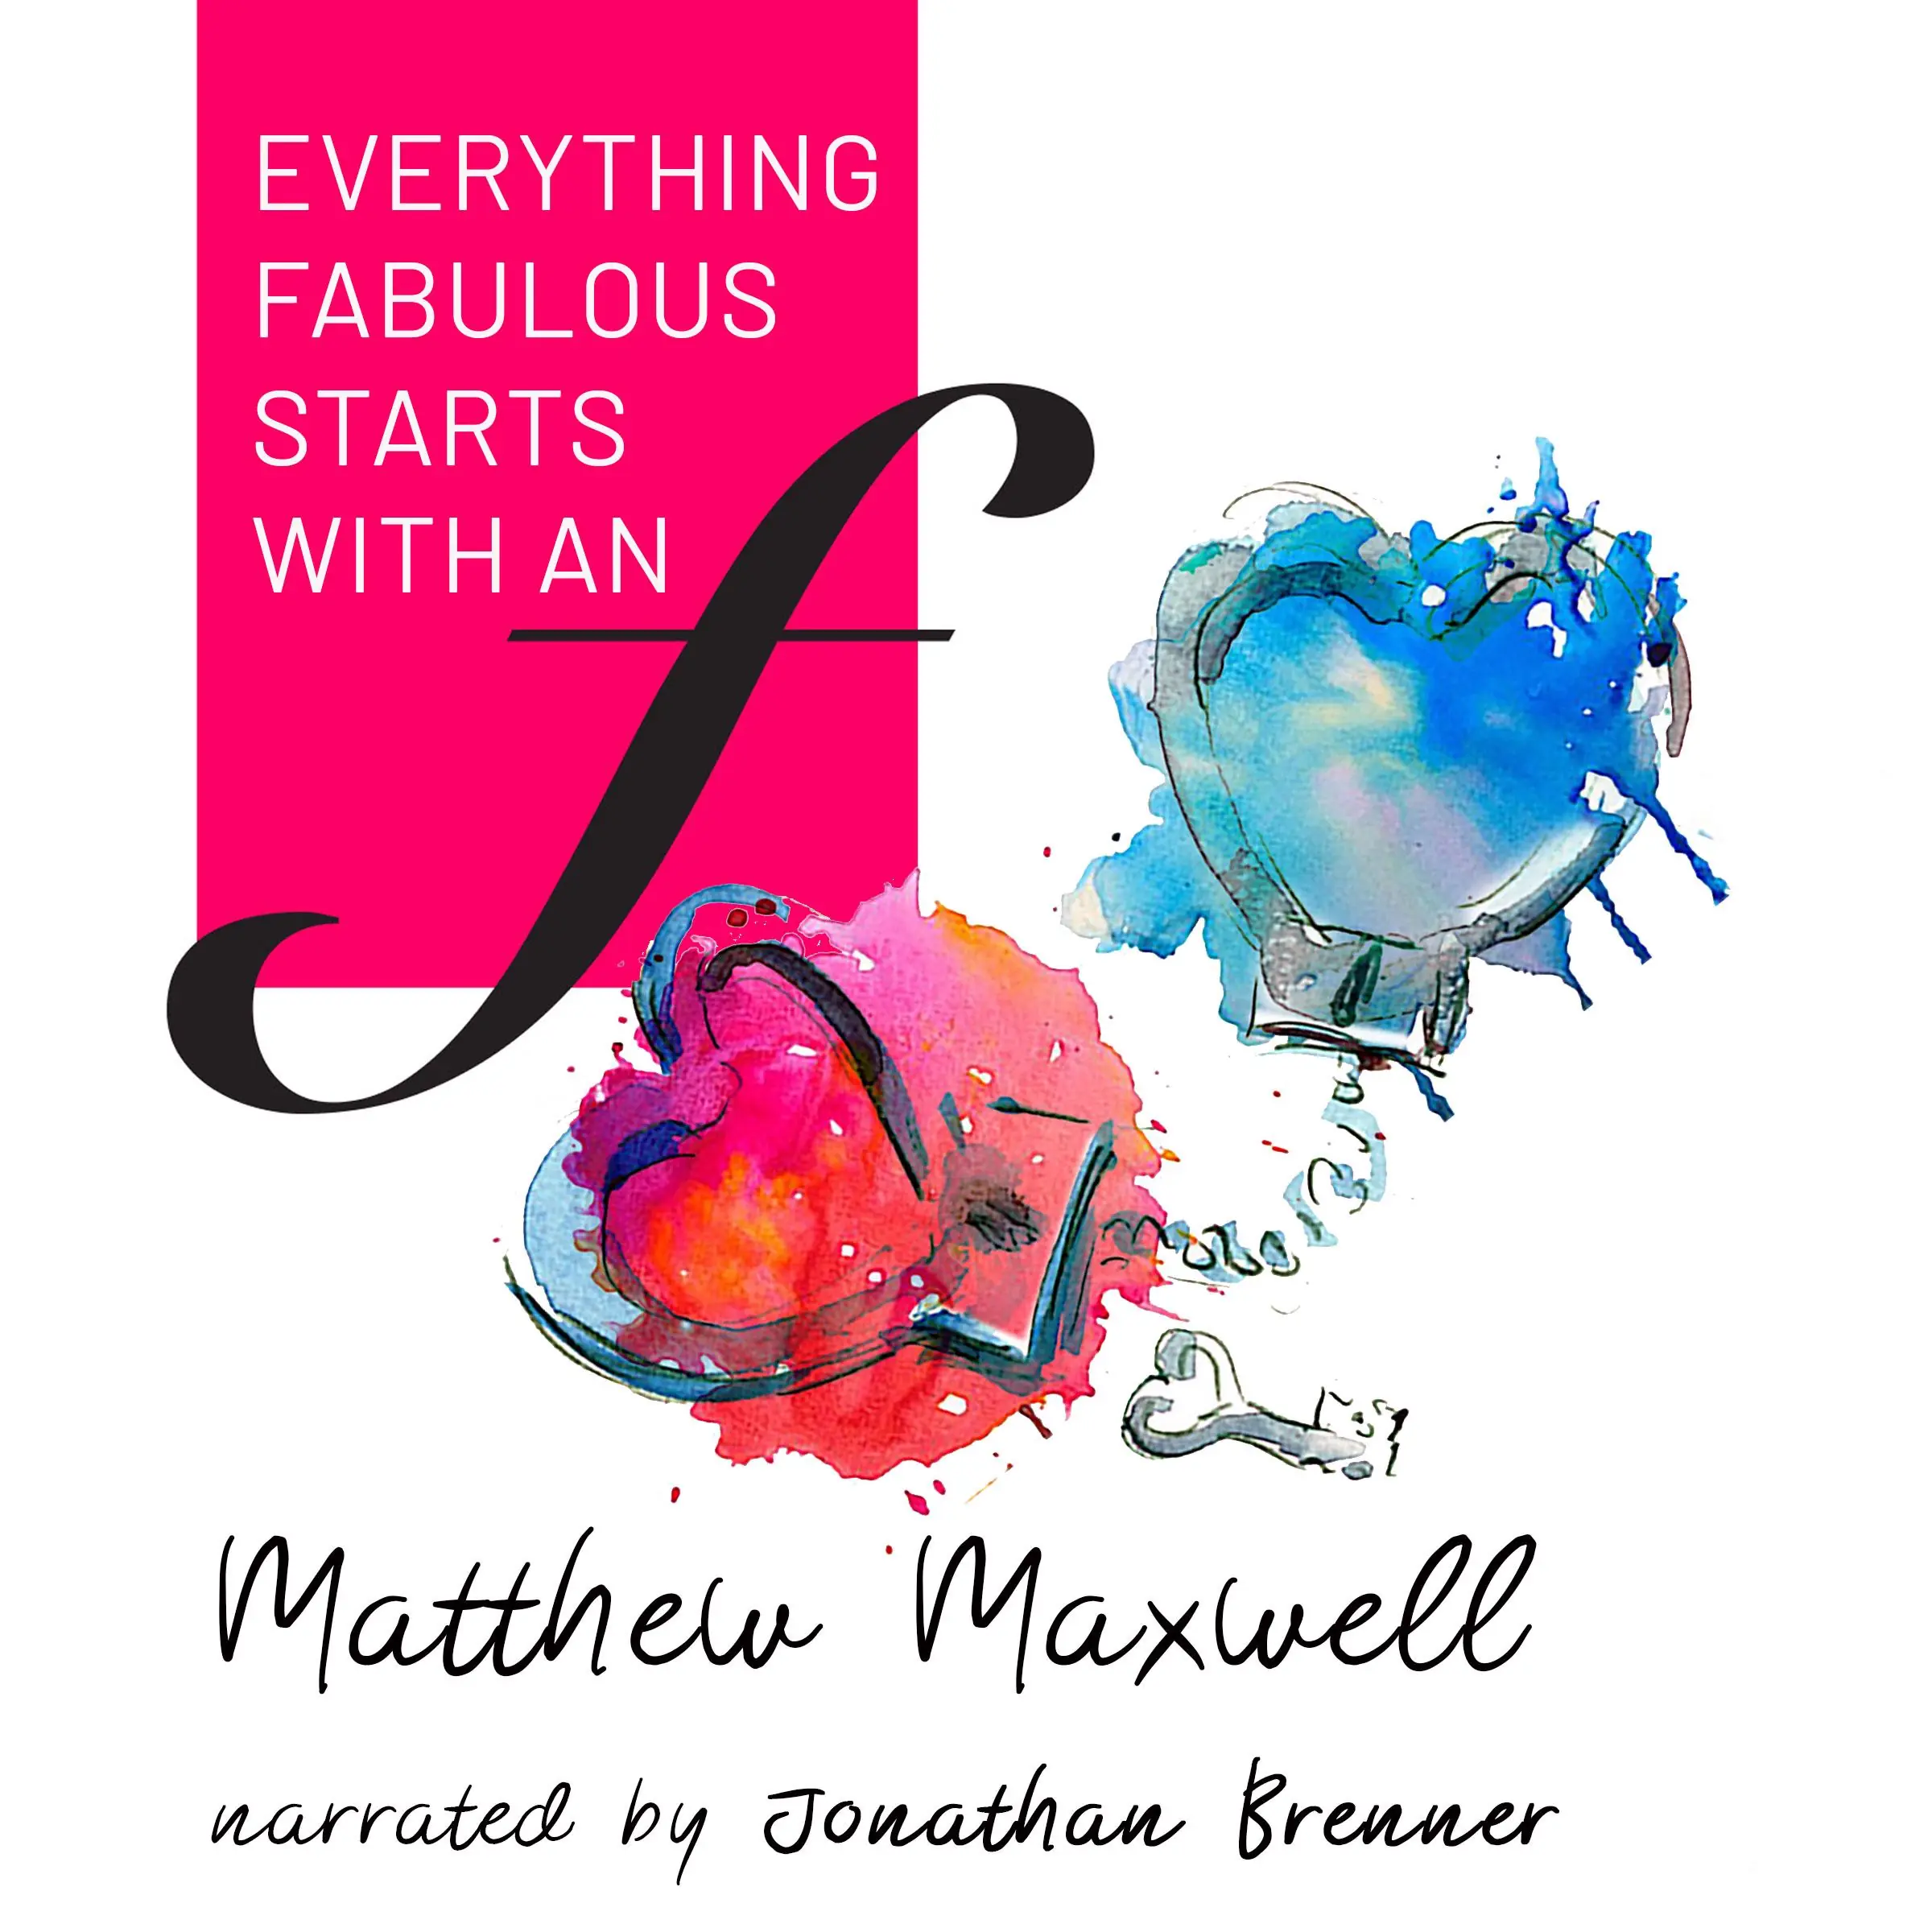 Everything Fabulous starts with an F Audiobook by Matthew Maxwell